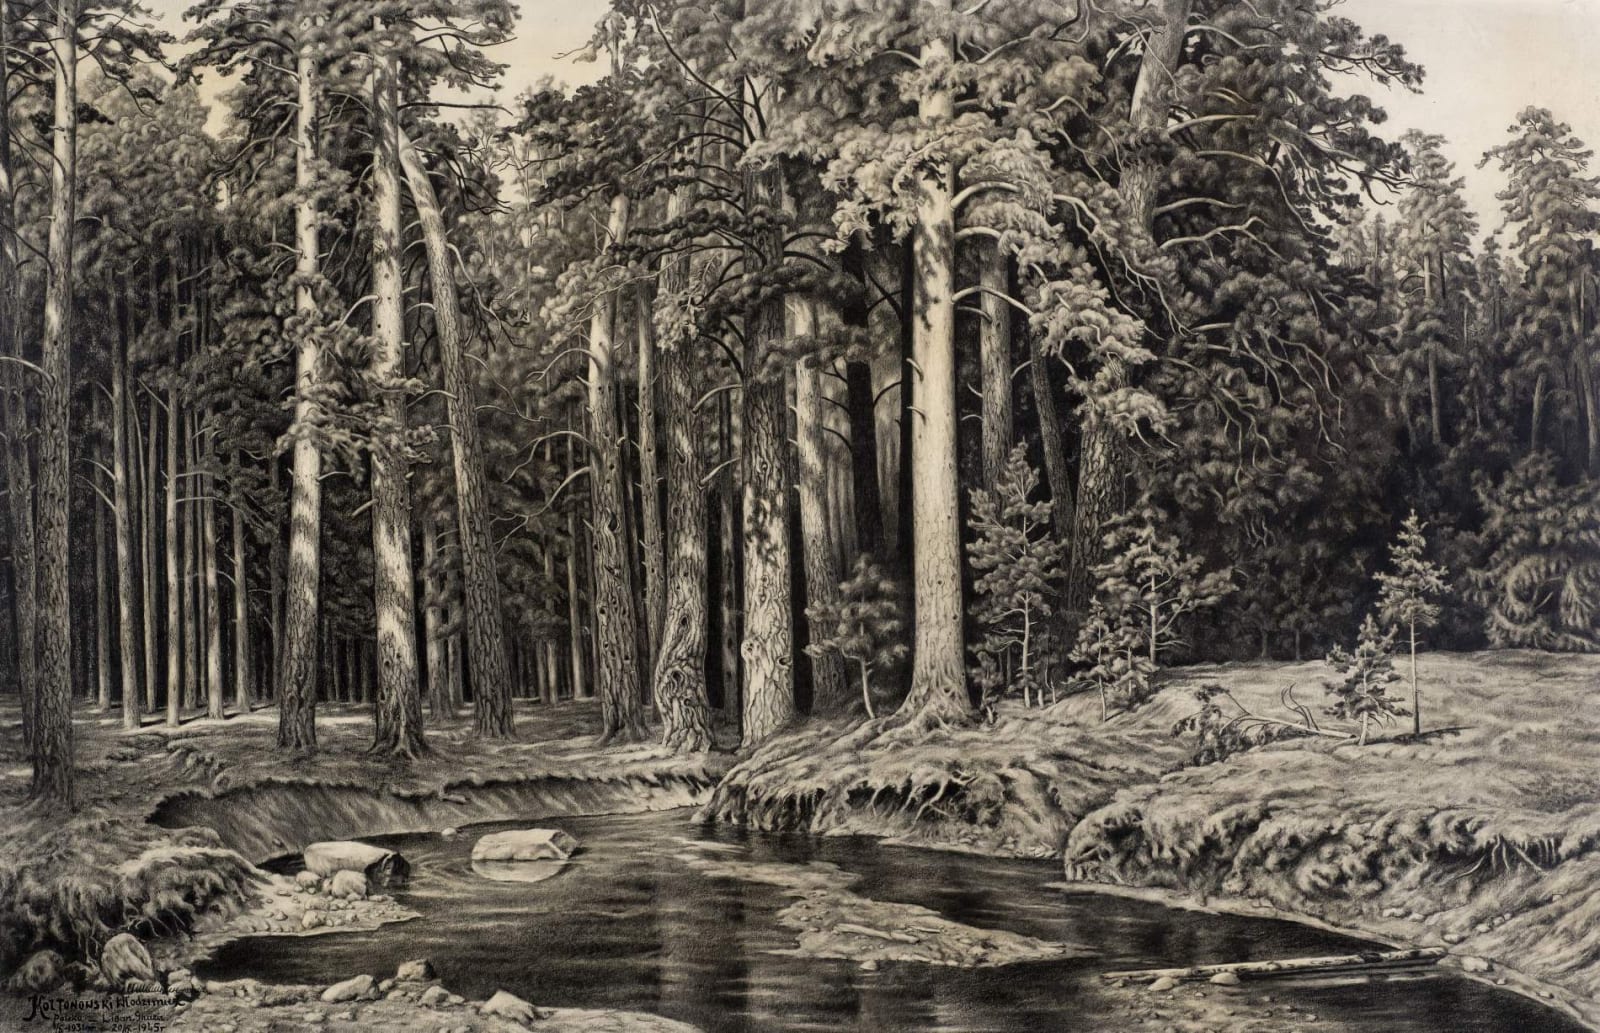 Wlodzimierz Koltonowski (1888-1973) Forest 1931-45 Charcoal and pencil on paper 106 x 145 cm The Polish Library, POSK in London